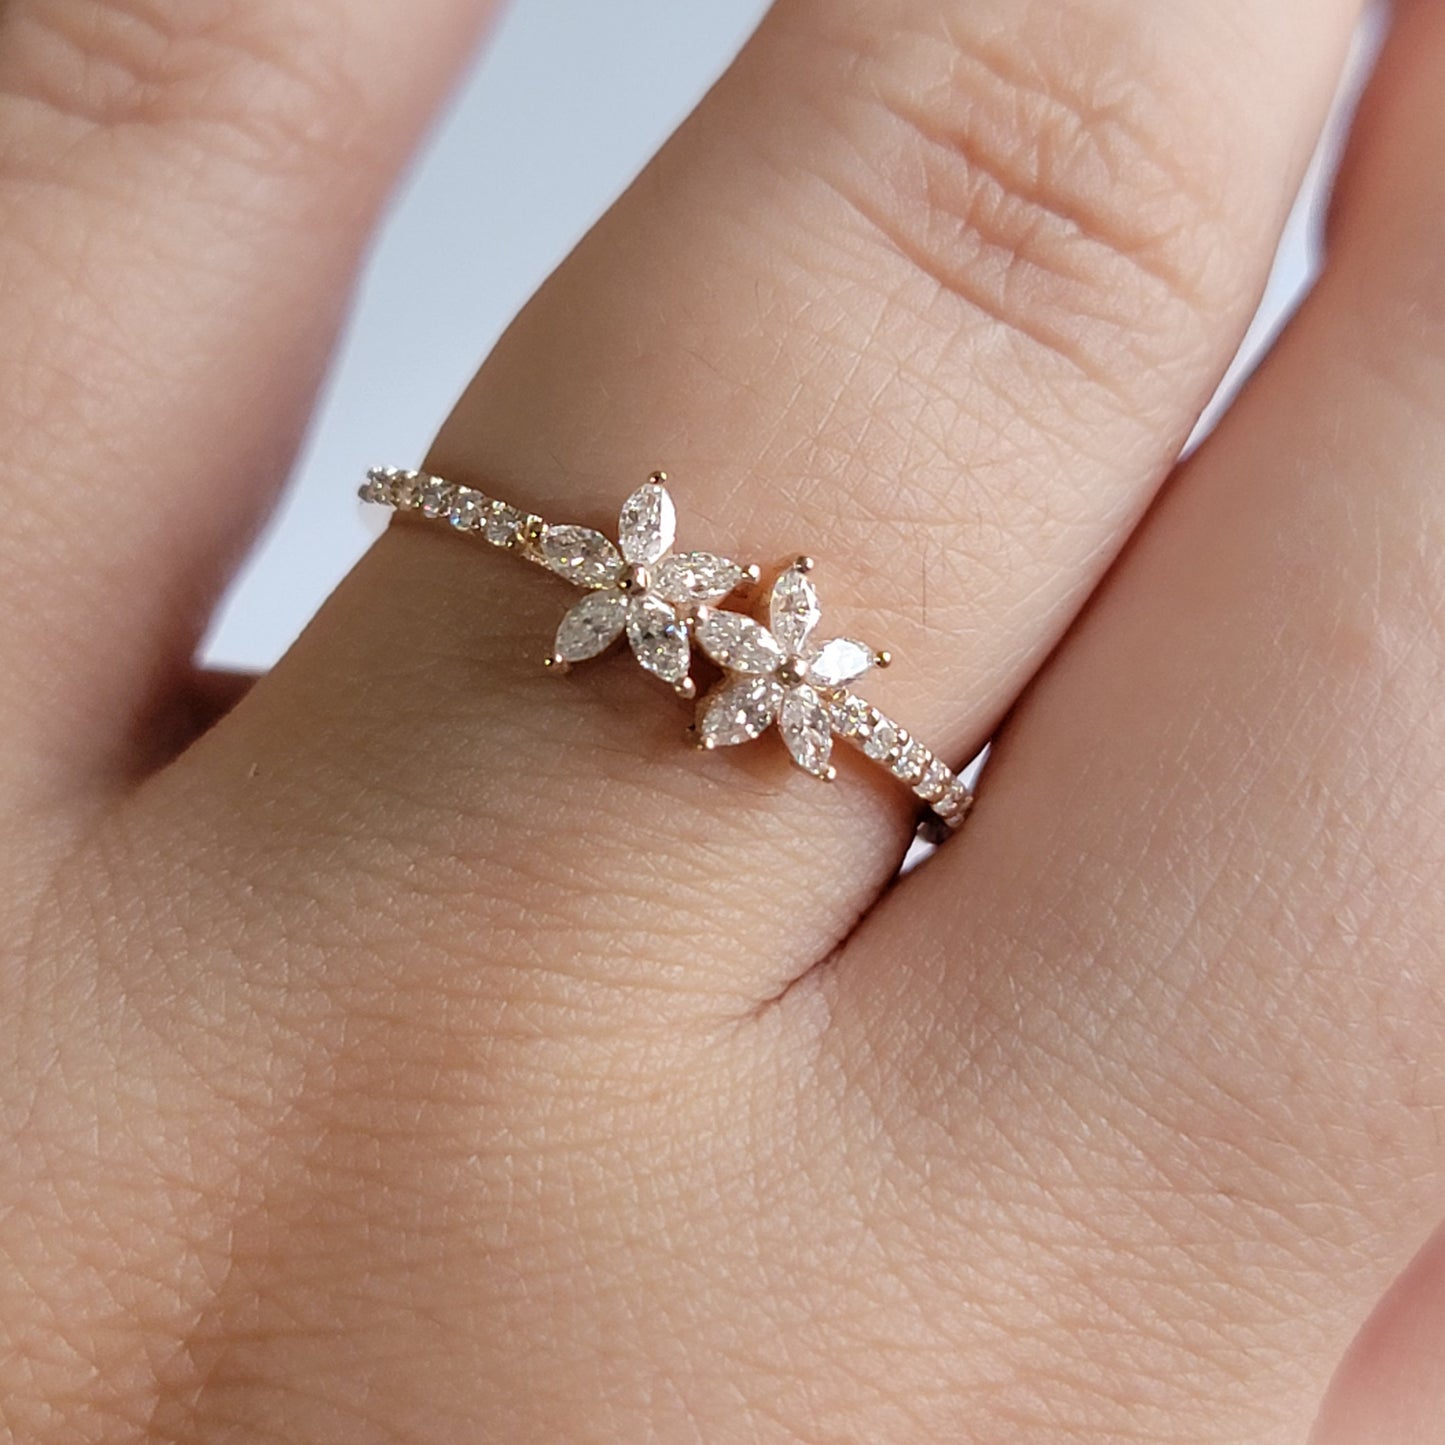 Marquise Diamond Ring in 14k Solid Gold , Diamond Cluster Ring, Dainty Ring, Vintage Diamond Flower Ring, Promise Ring for Her